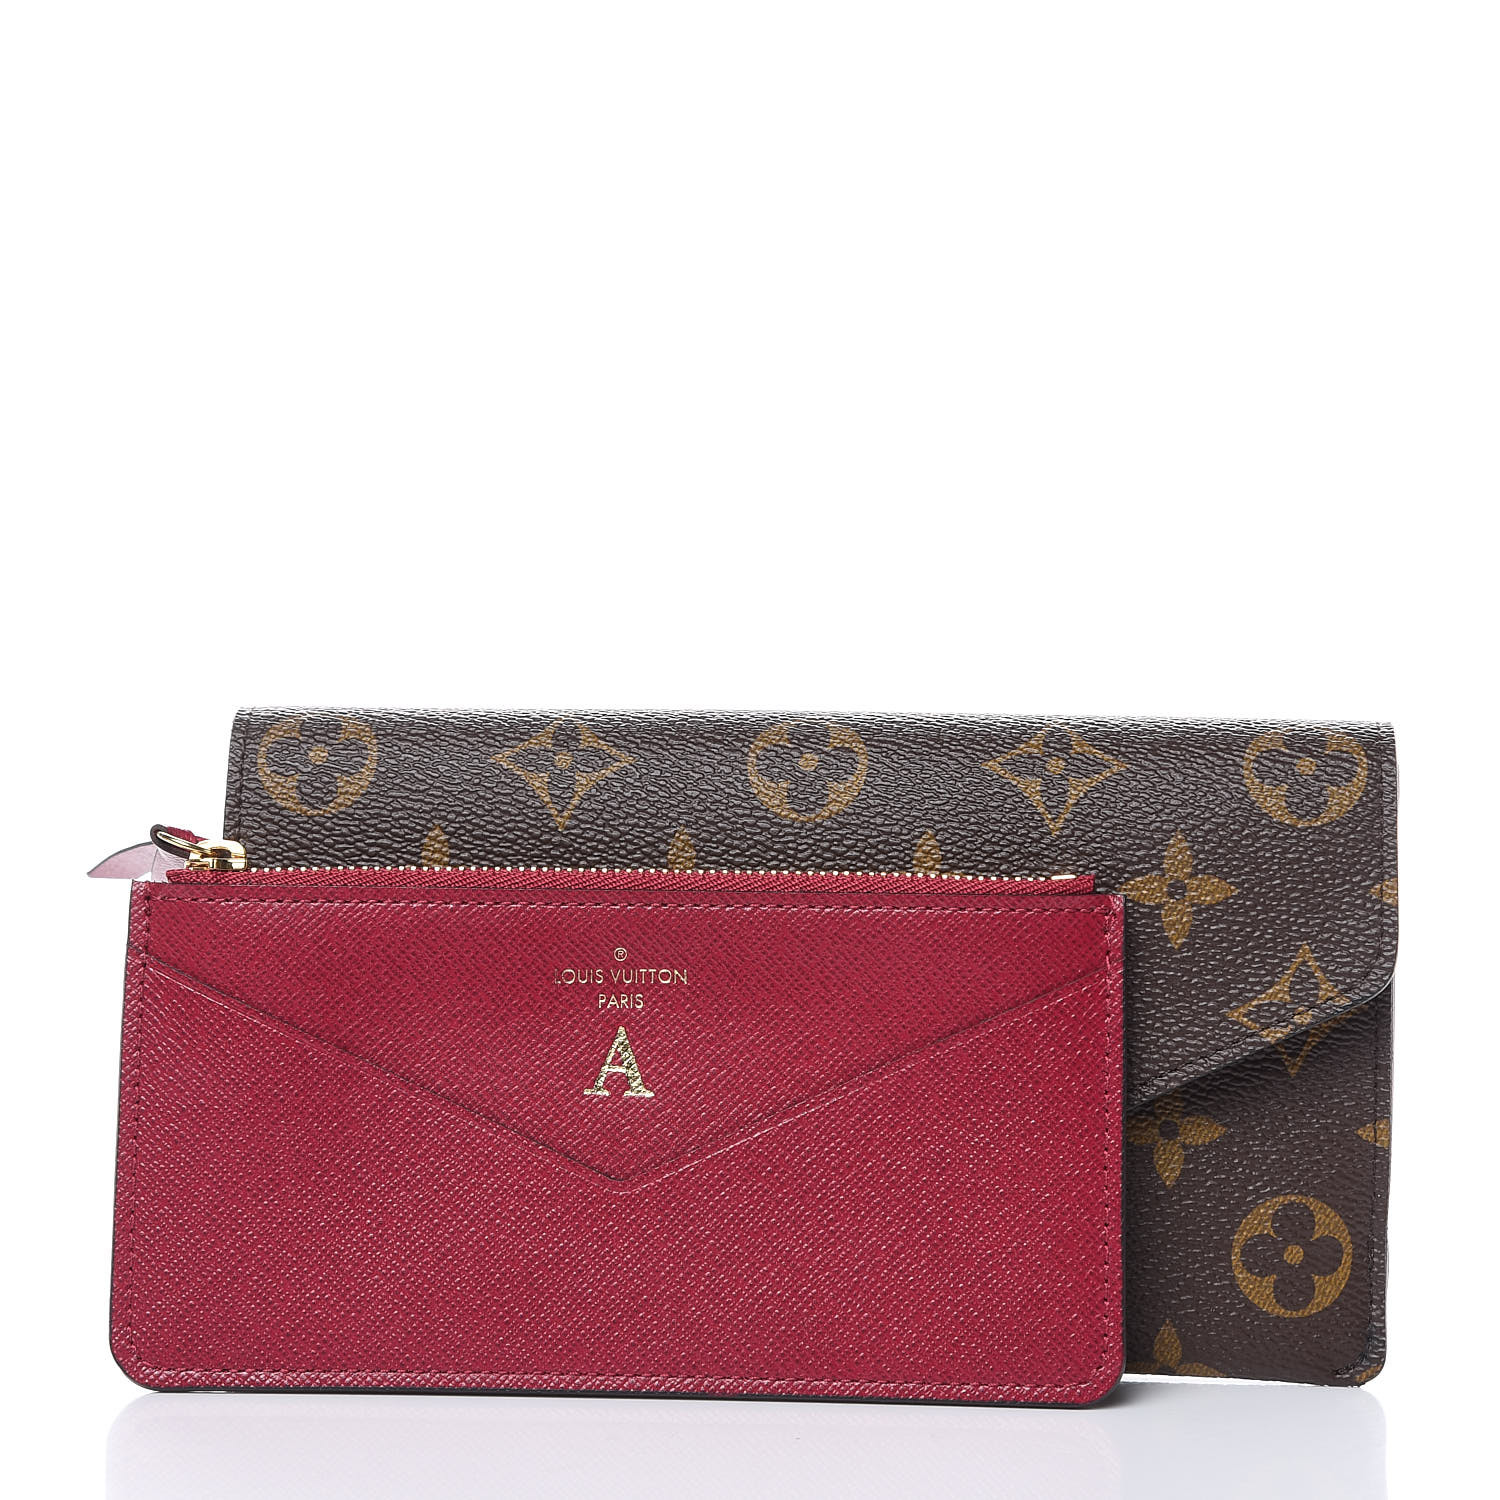 Bags, Authentic Louis Vuitton Jeanne Wallet Fuchsia Card Holder Only